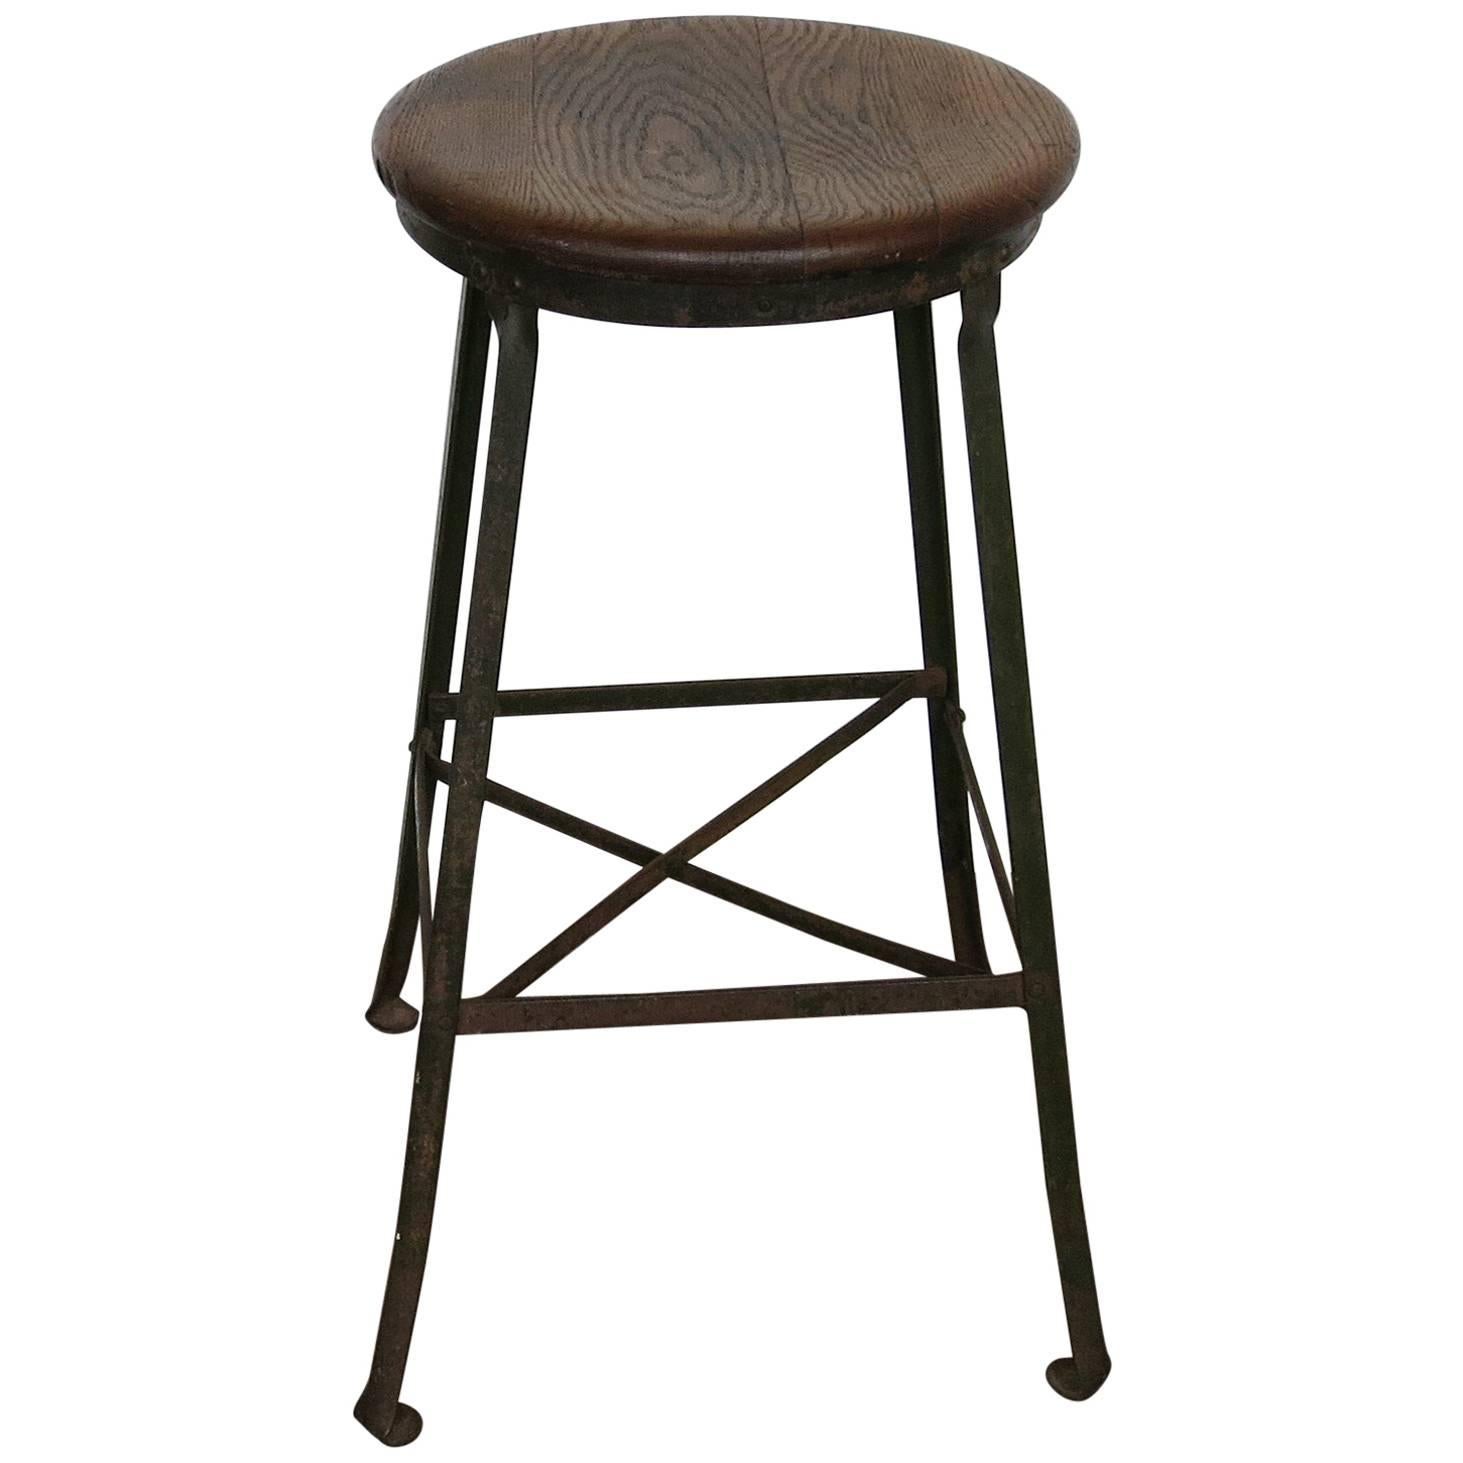 Vintage Industrial Stool Angle Steel Co., 1940s For Sale